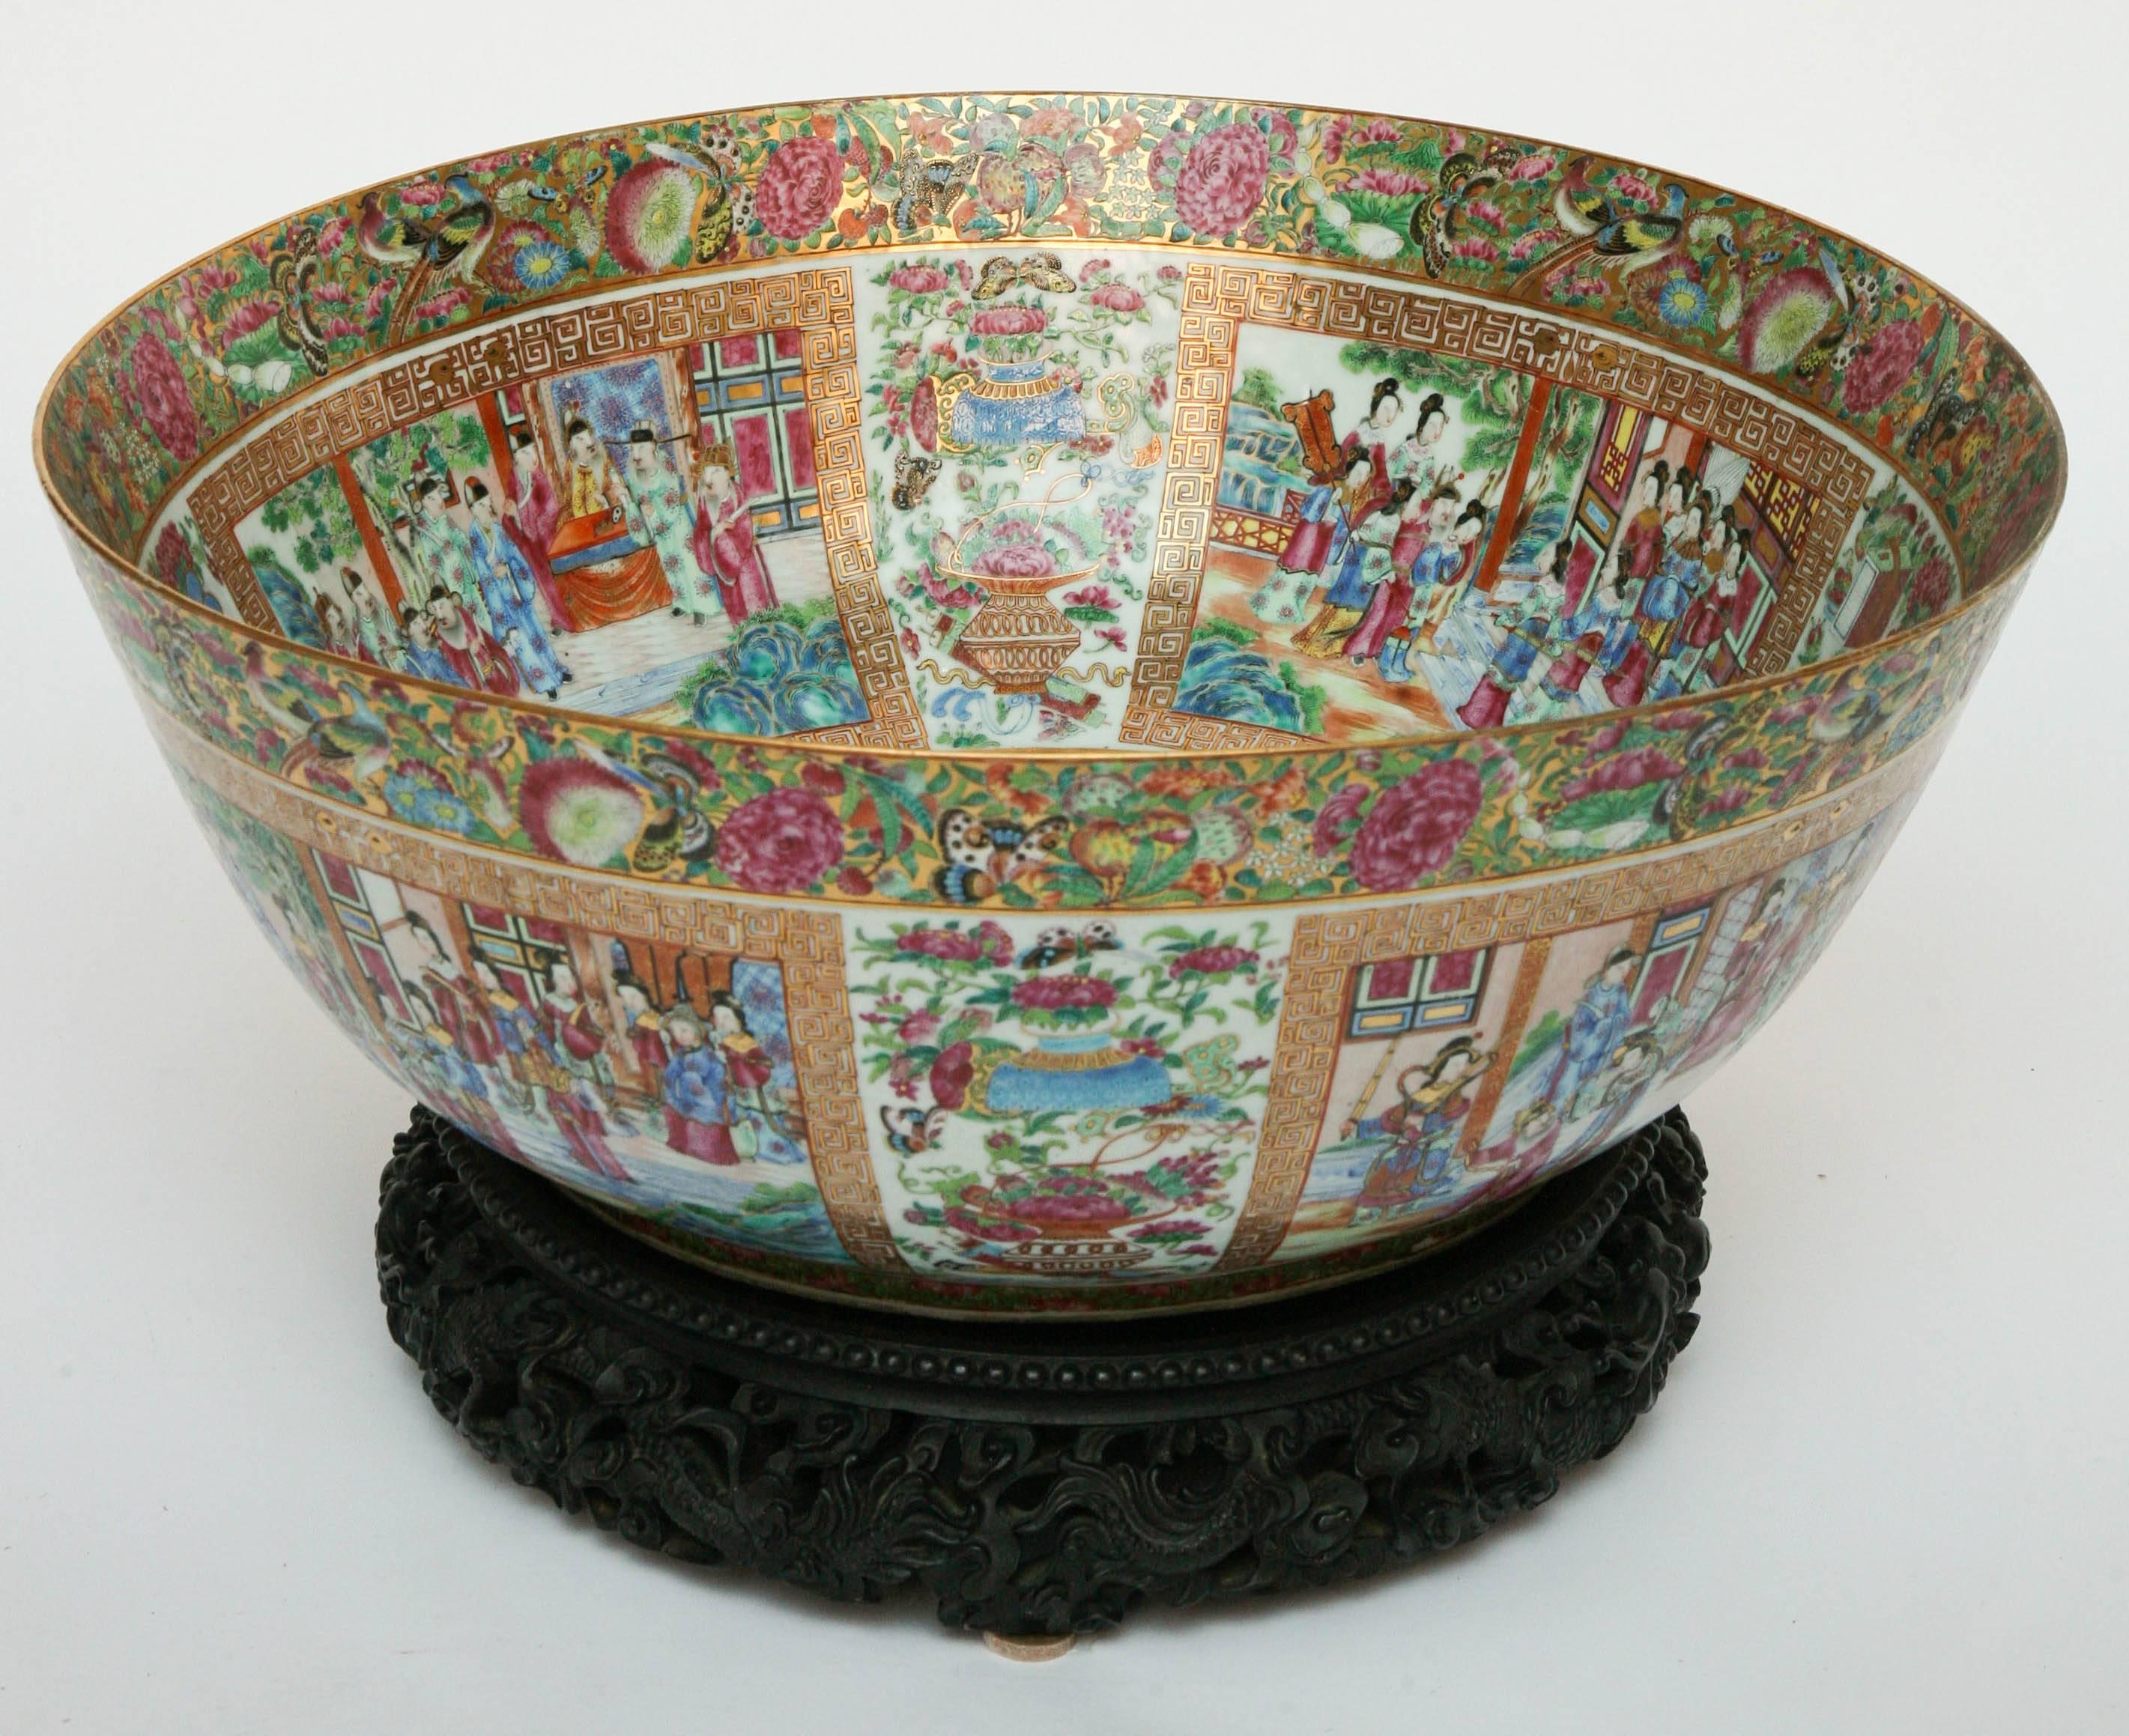 This is a rare and exceptional bowl with fine pen work and unusual turquoise accents. The figures are finely detailed. The 4